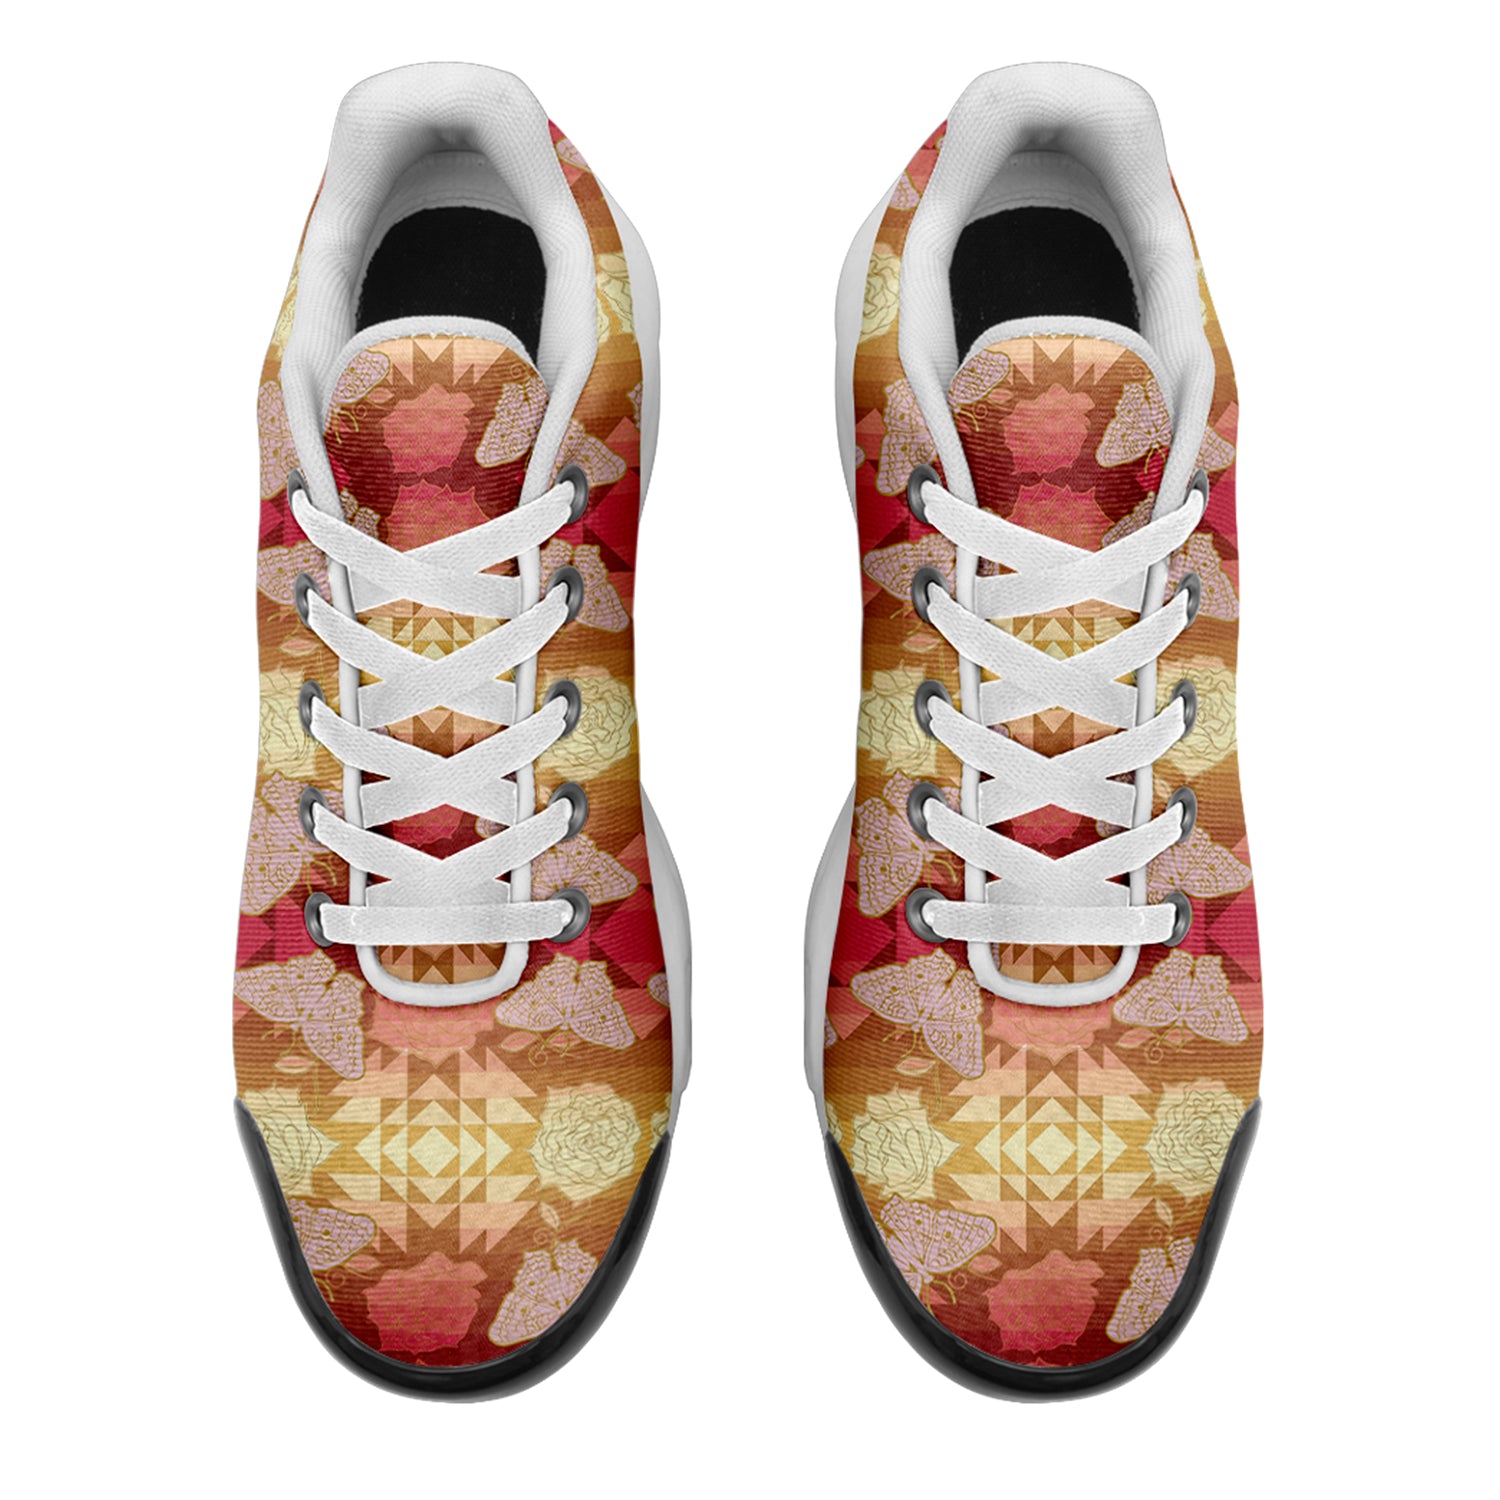 Butterfly and Roses on Geometric Niowaa Air Cushion Shoes